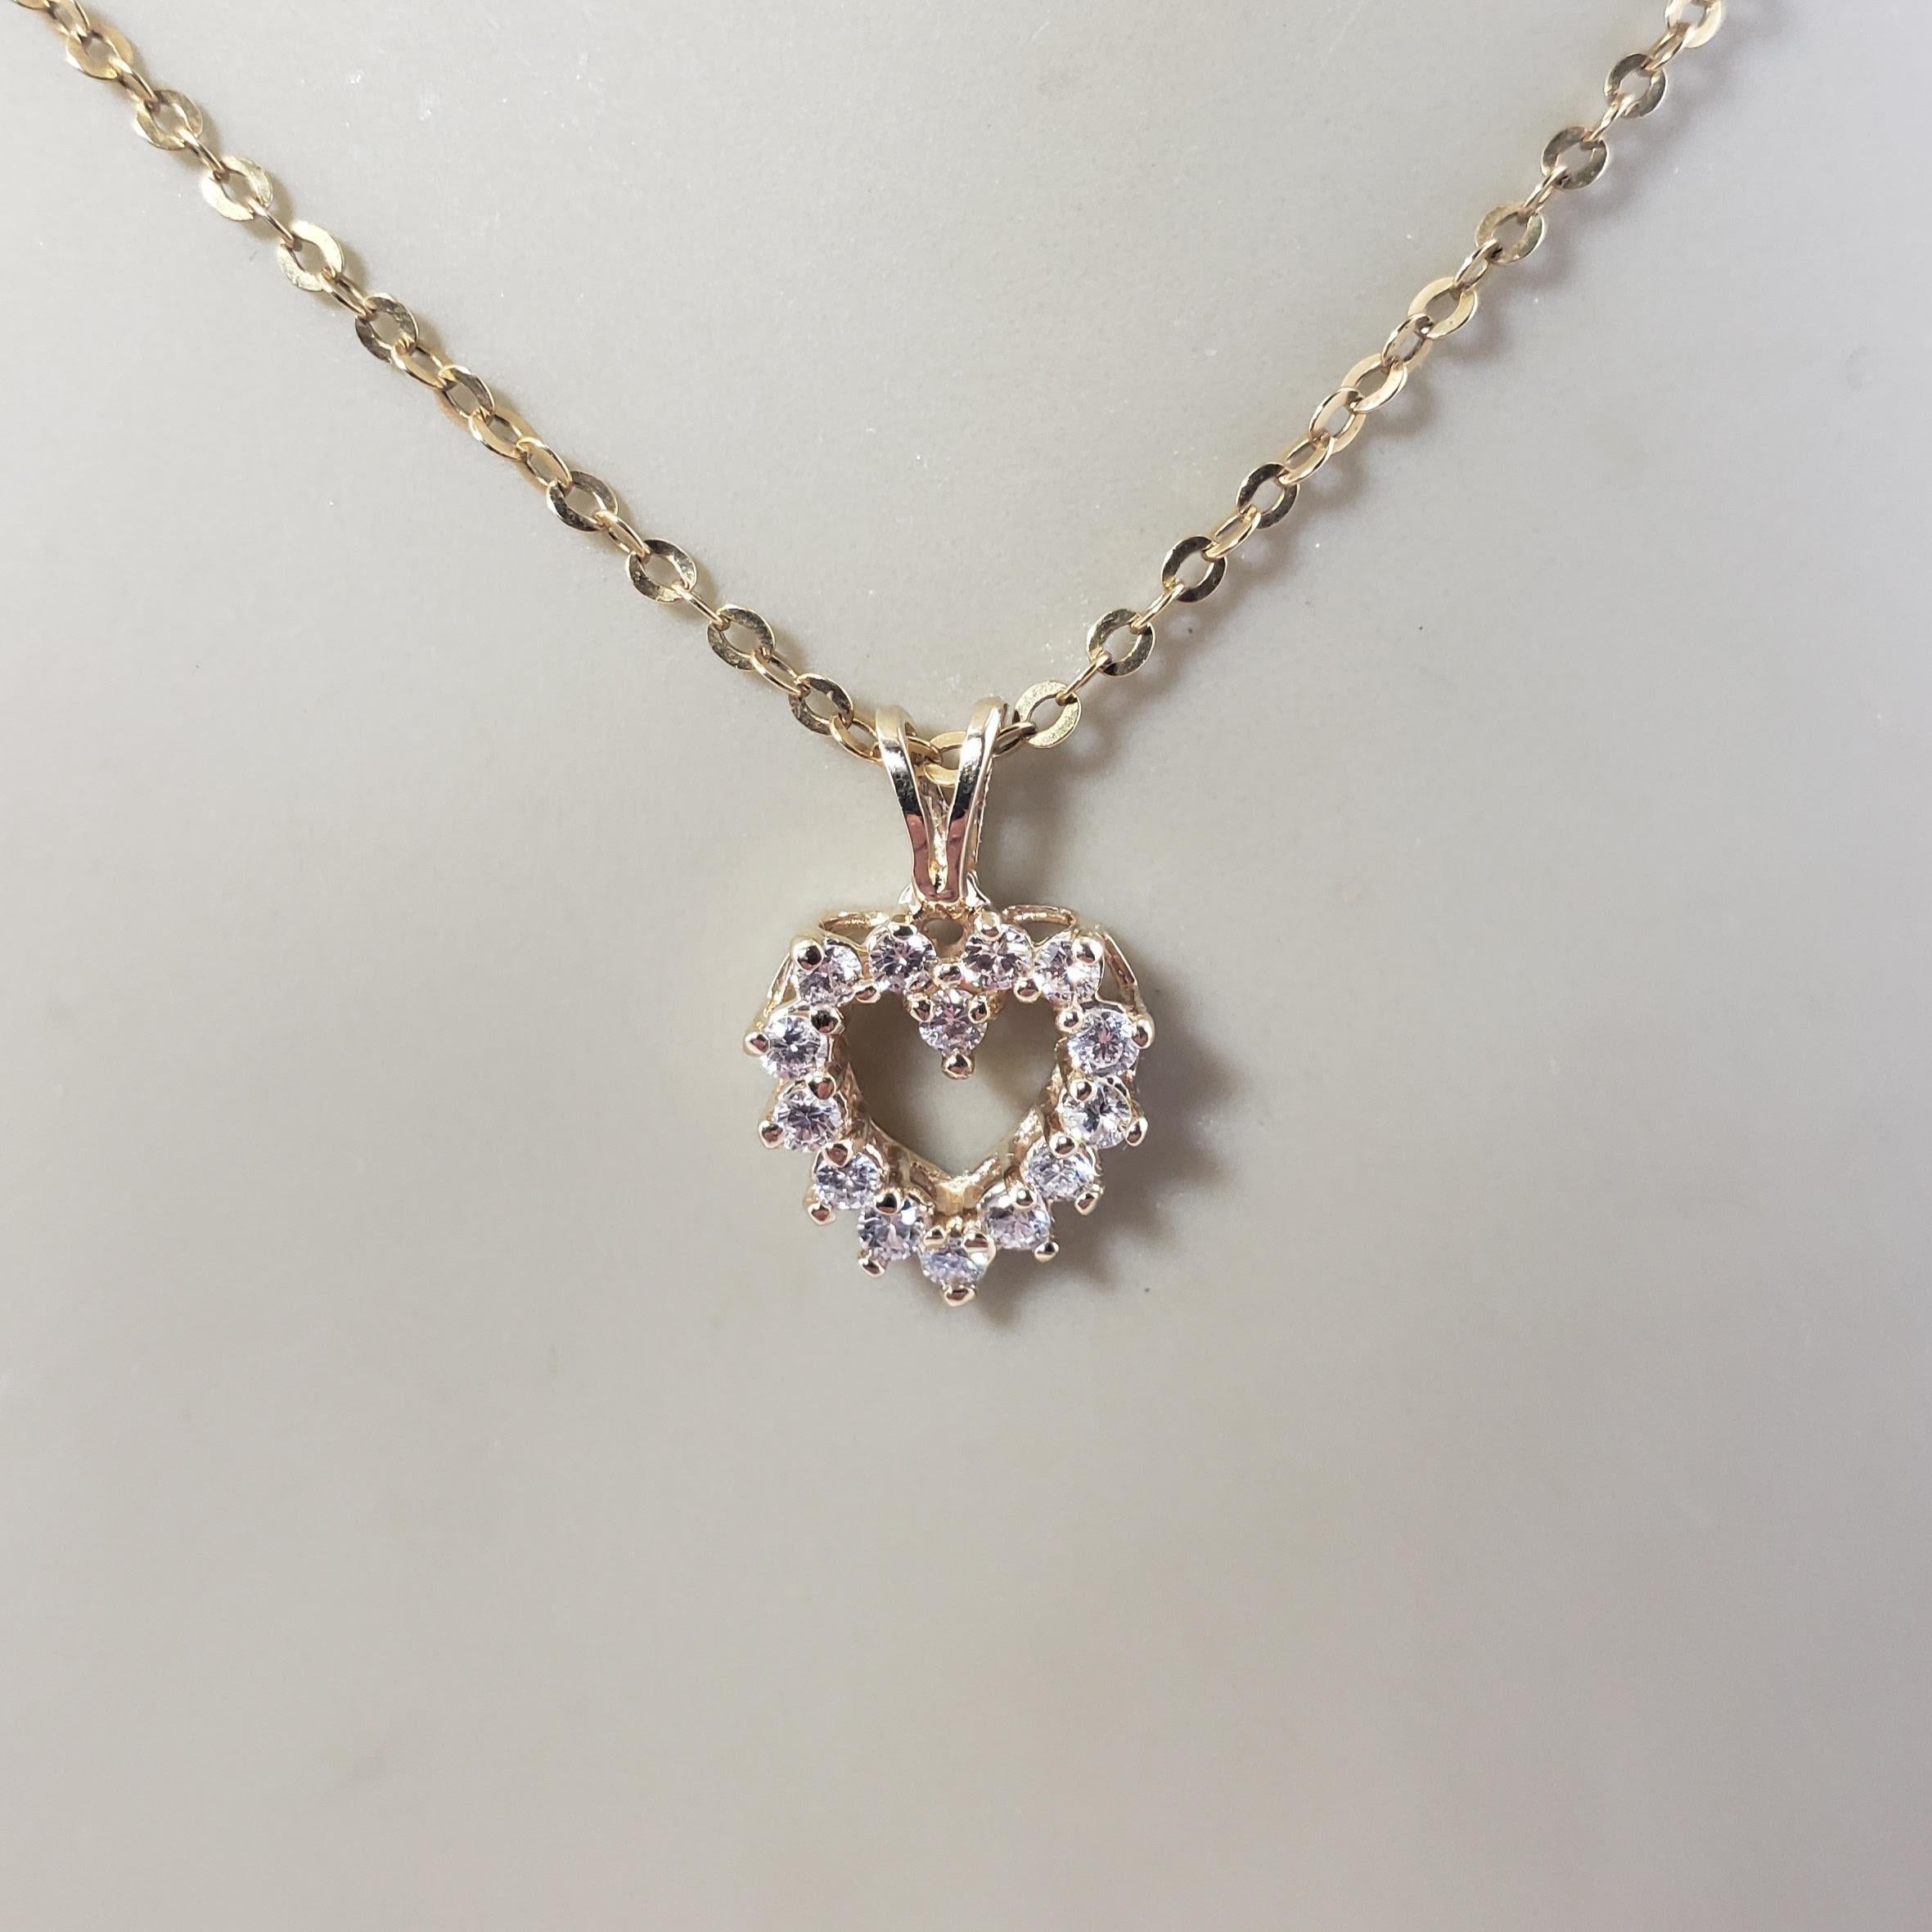 Vintage 14 Karat Yellow Gold Diamond Heart Pendant-

This sparkling heart pendant features 14 round brilliant cut diamonds set in classic 14K yellow gold.

Approximate total diamond weight: .30 ct.

Diamond clarity: SI1-VS2

Diamond color: G

Size: